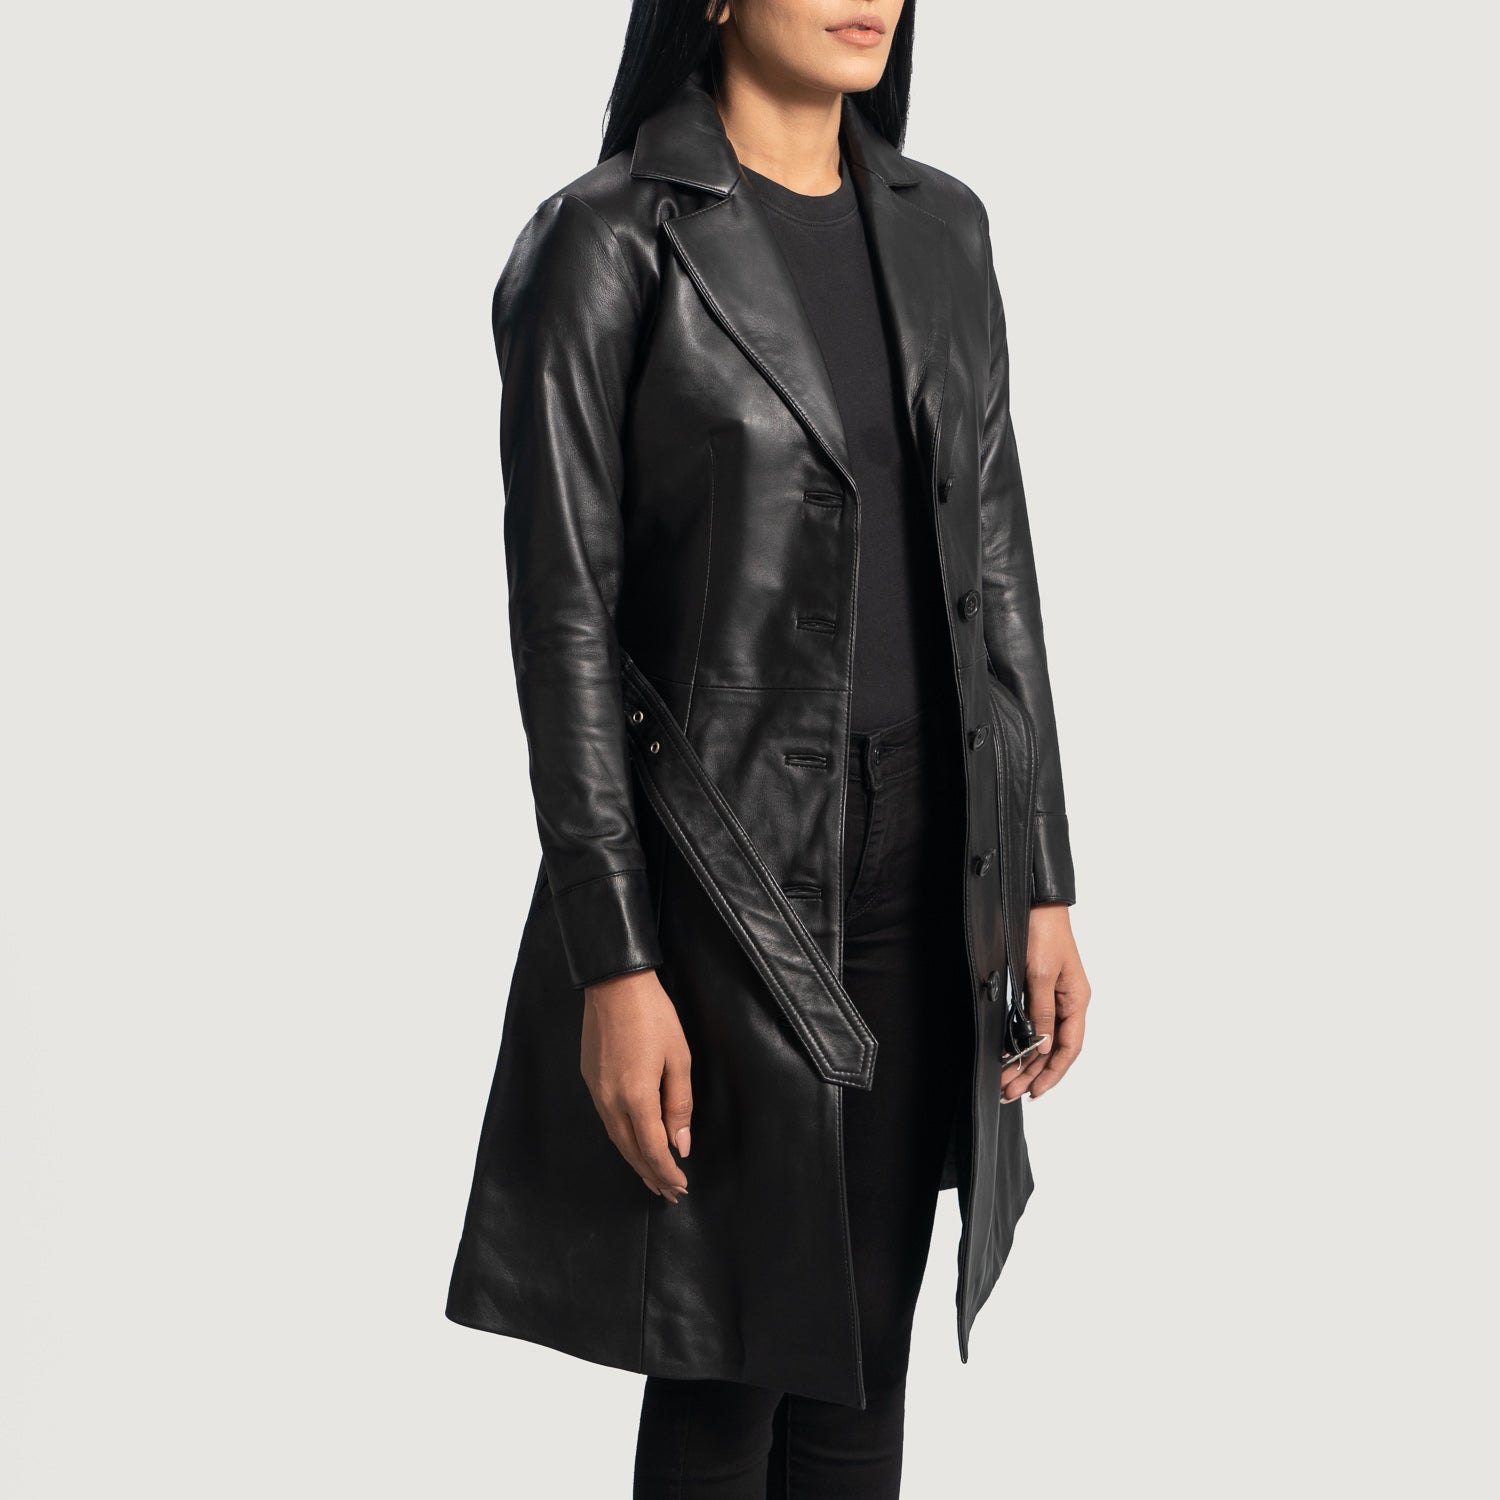 Womens Moon light Black Leather Trench Coat Full Length Women's Black Leather Trench Coat Full Length, Full Length Black Leather Coat for Women, Women's Leather Trench Coat, Stylish Women's Leather Trench Coat, Premium Quality Women's Leather Coat, Elegant Women's Leather Outerwear, Classic Women's Leather Coat